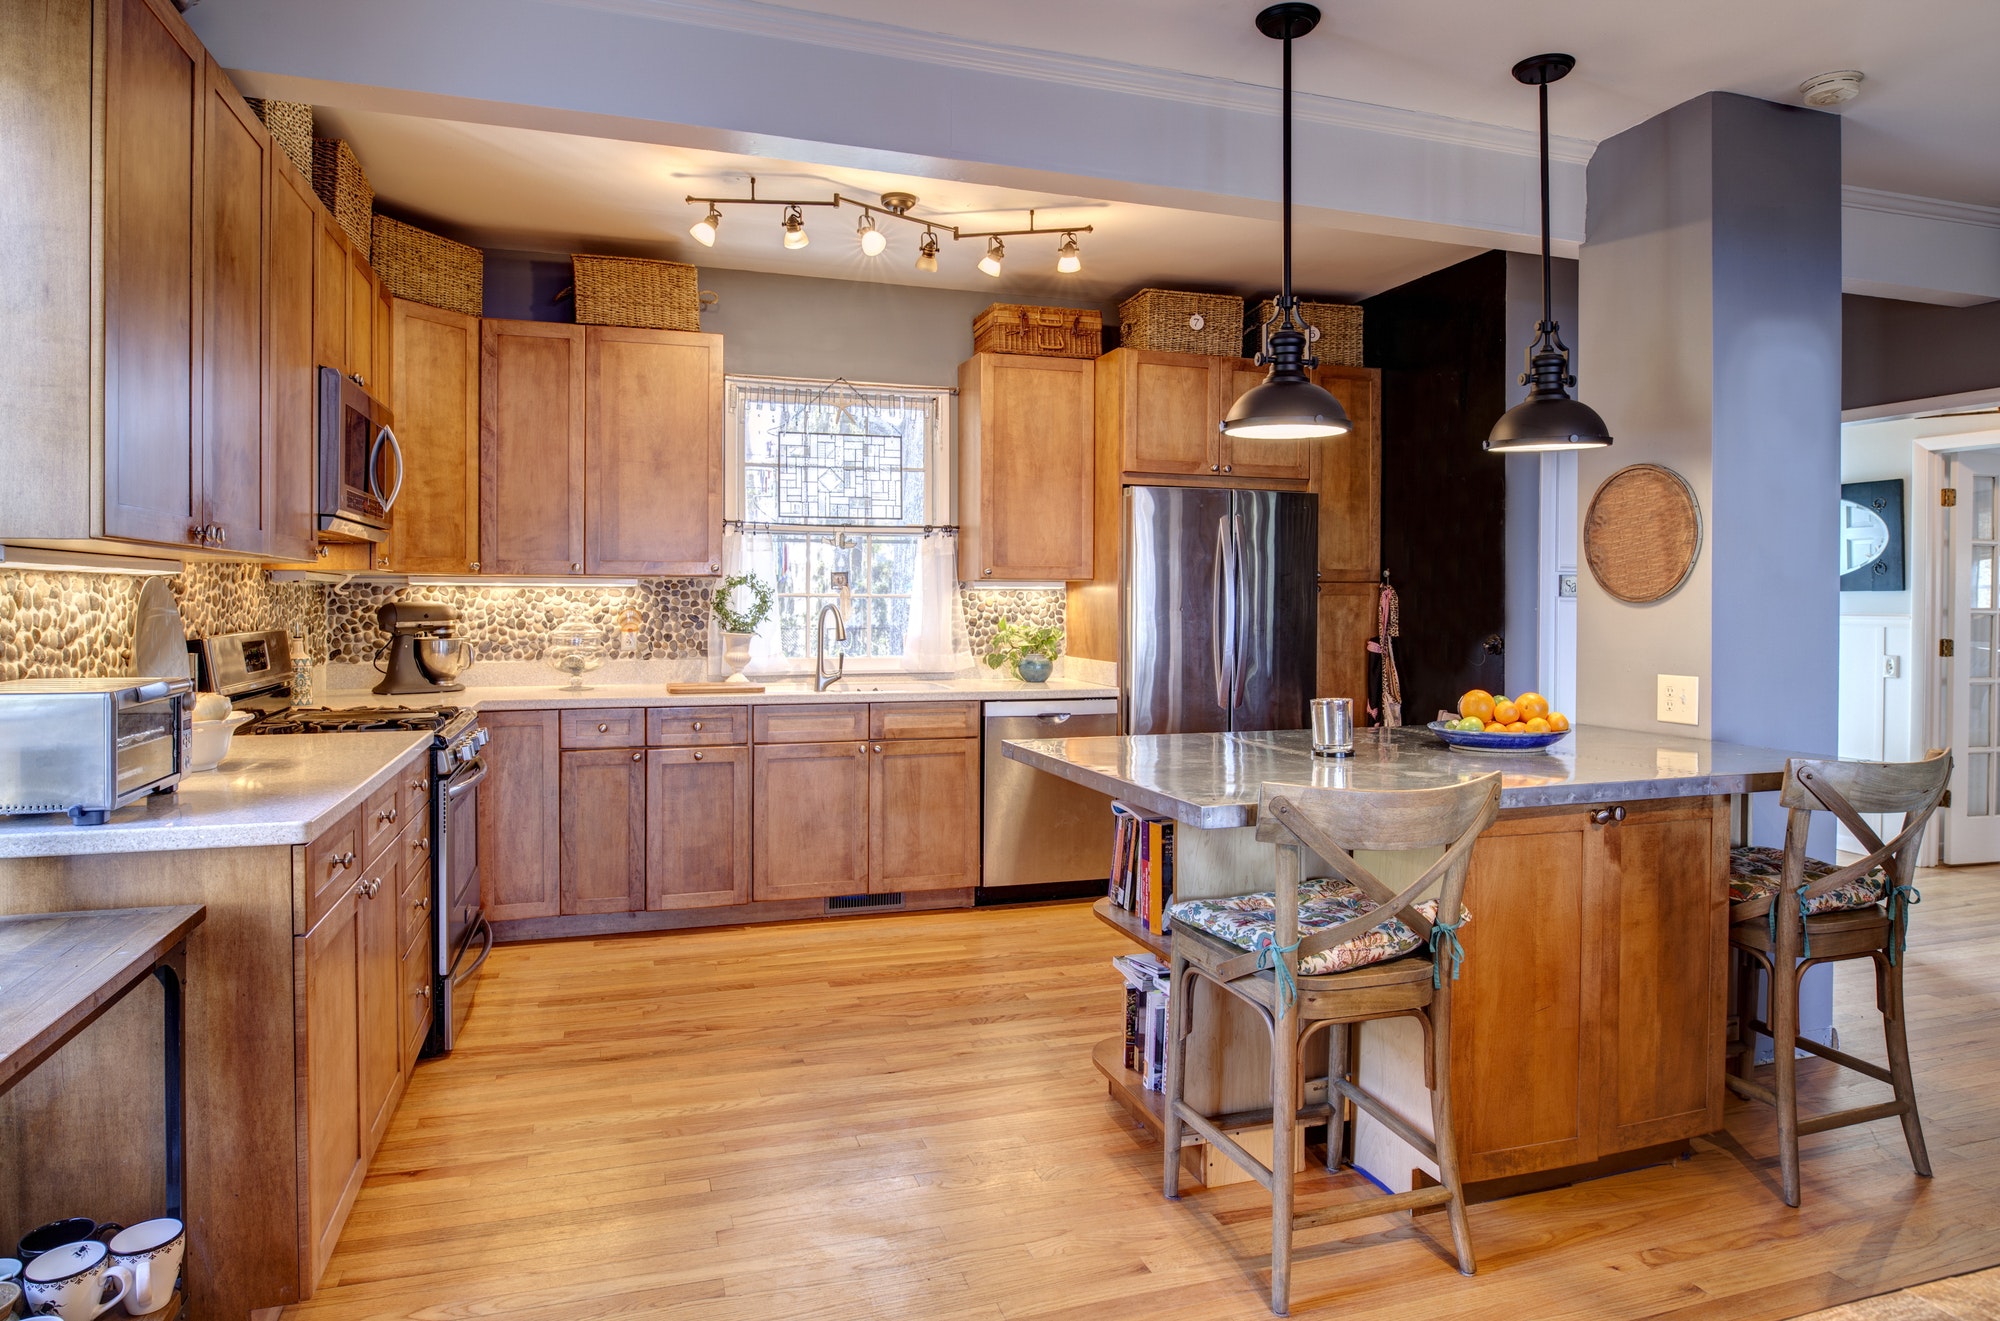 Handling Clutter With Affordable Kitchen Cabinets Near Me